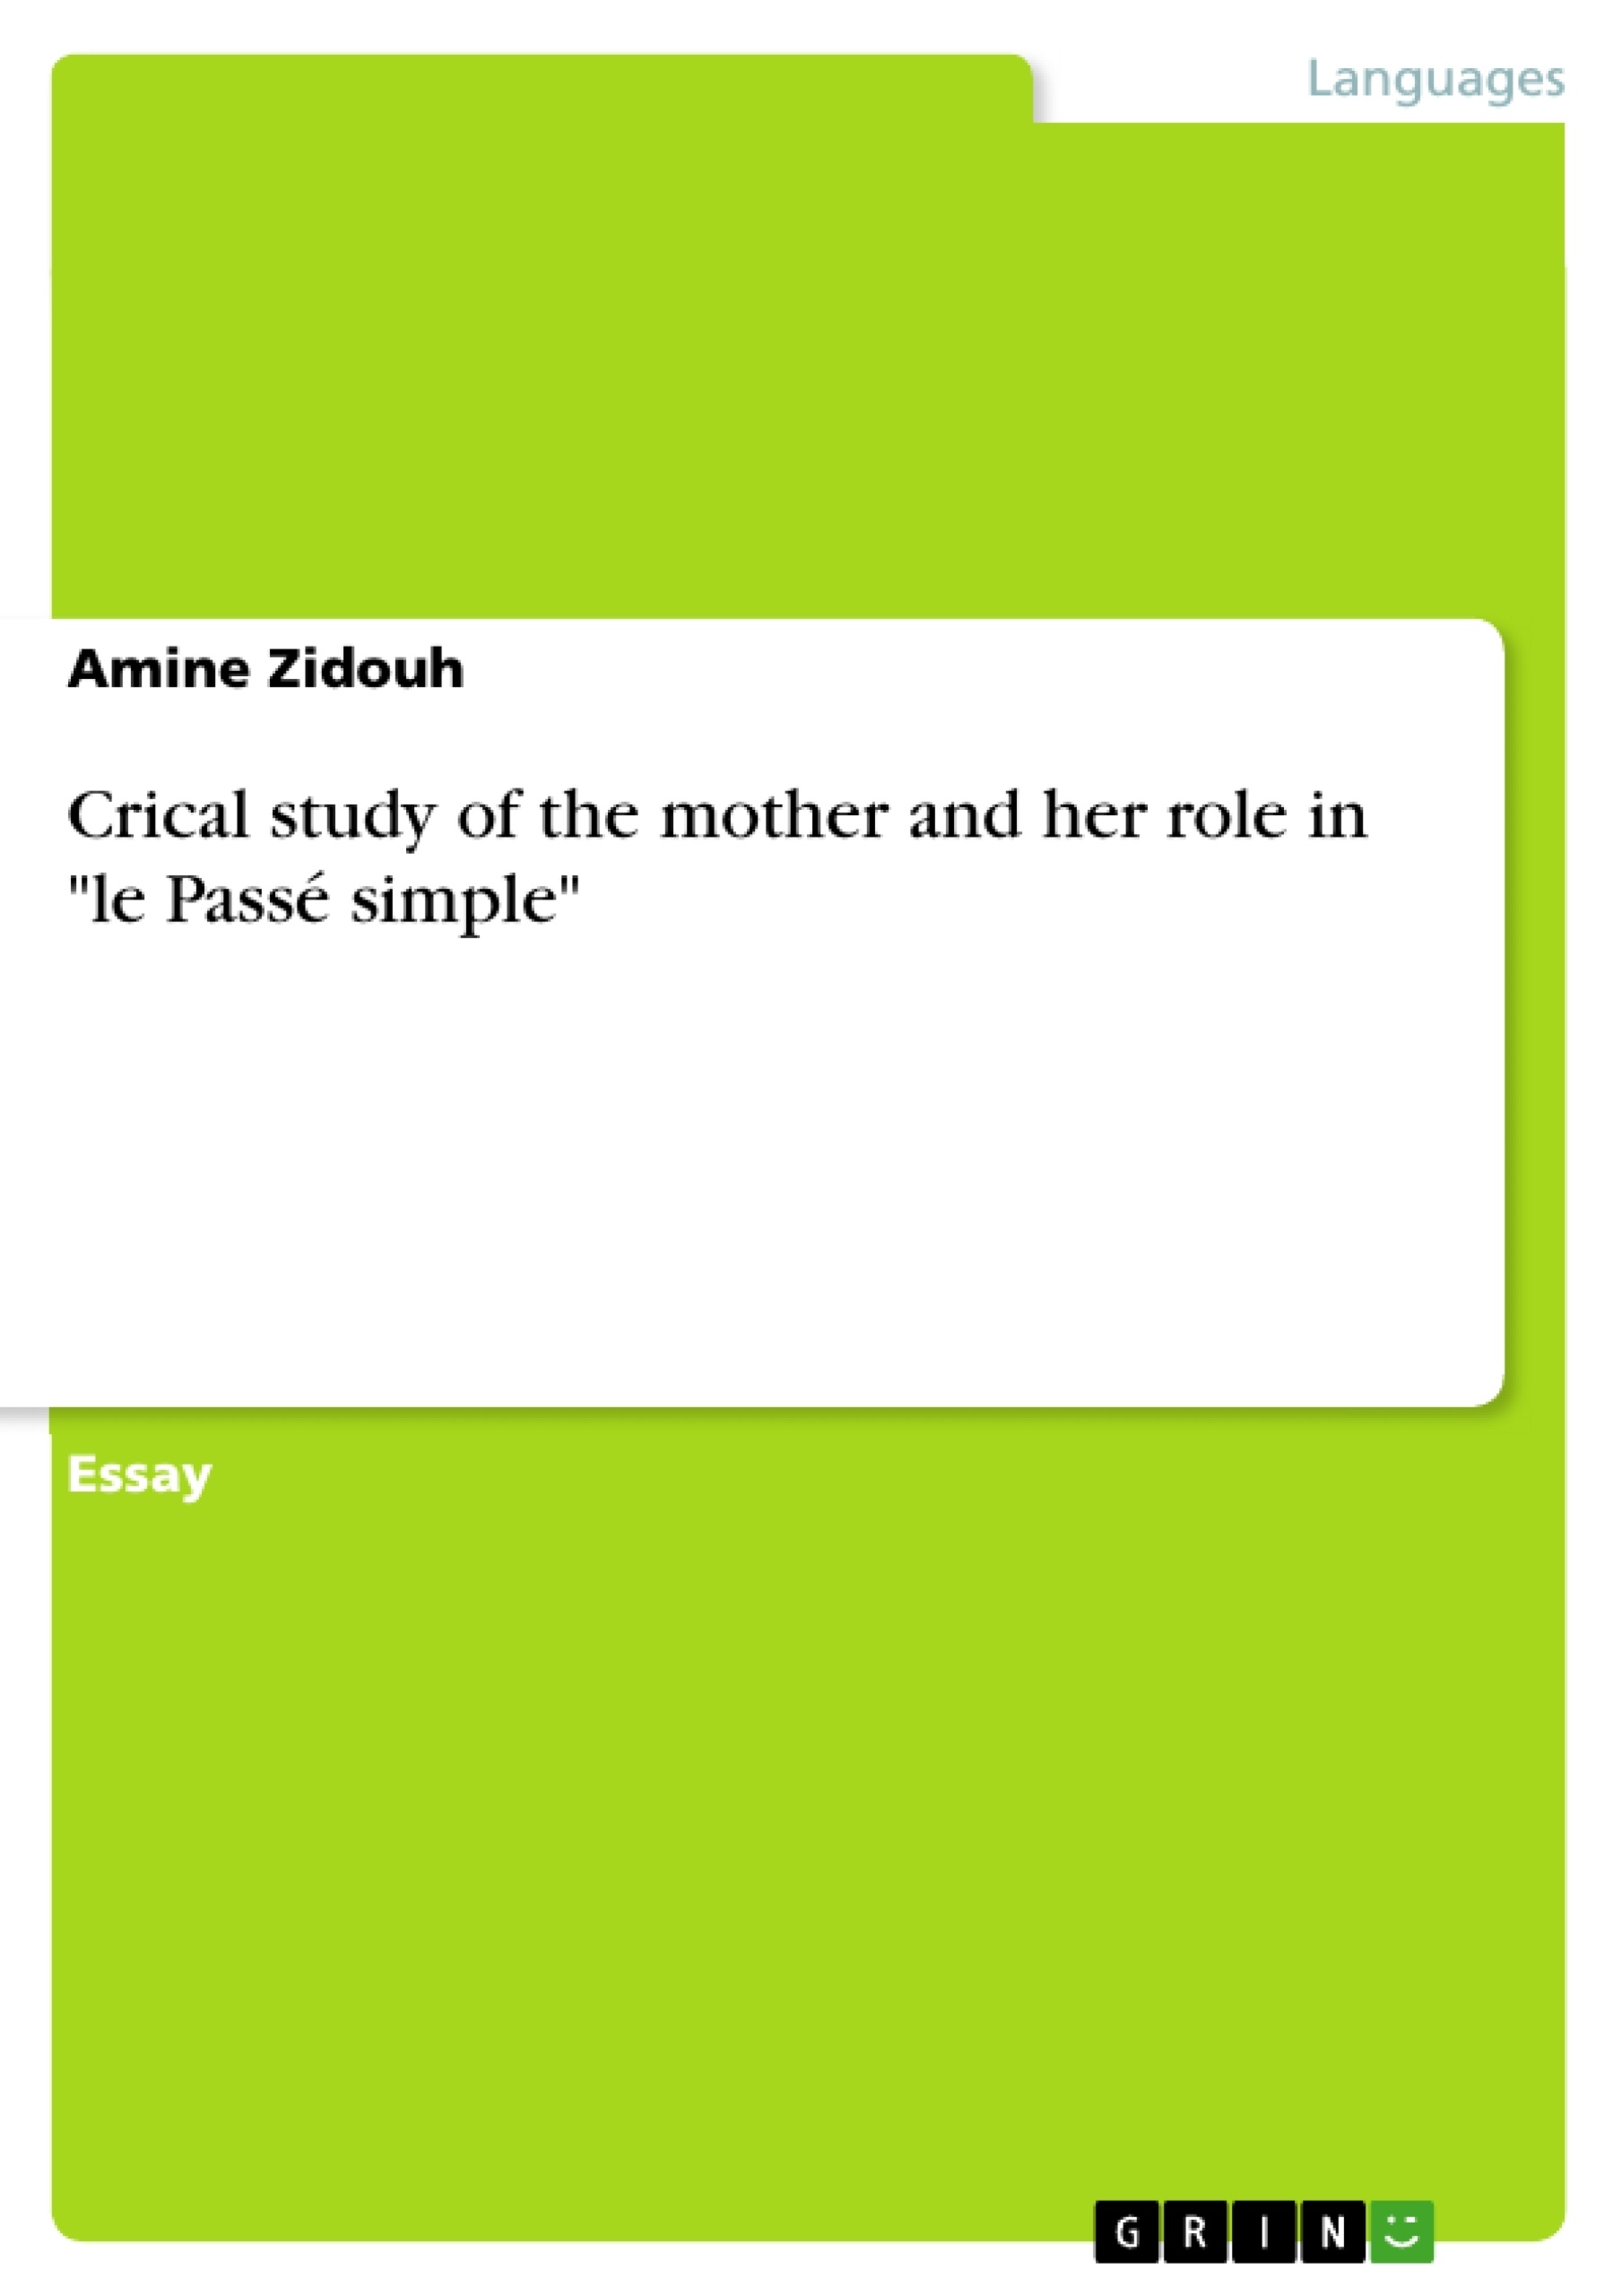 Título: Crical study of the mother and her role in "le Passé simple"